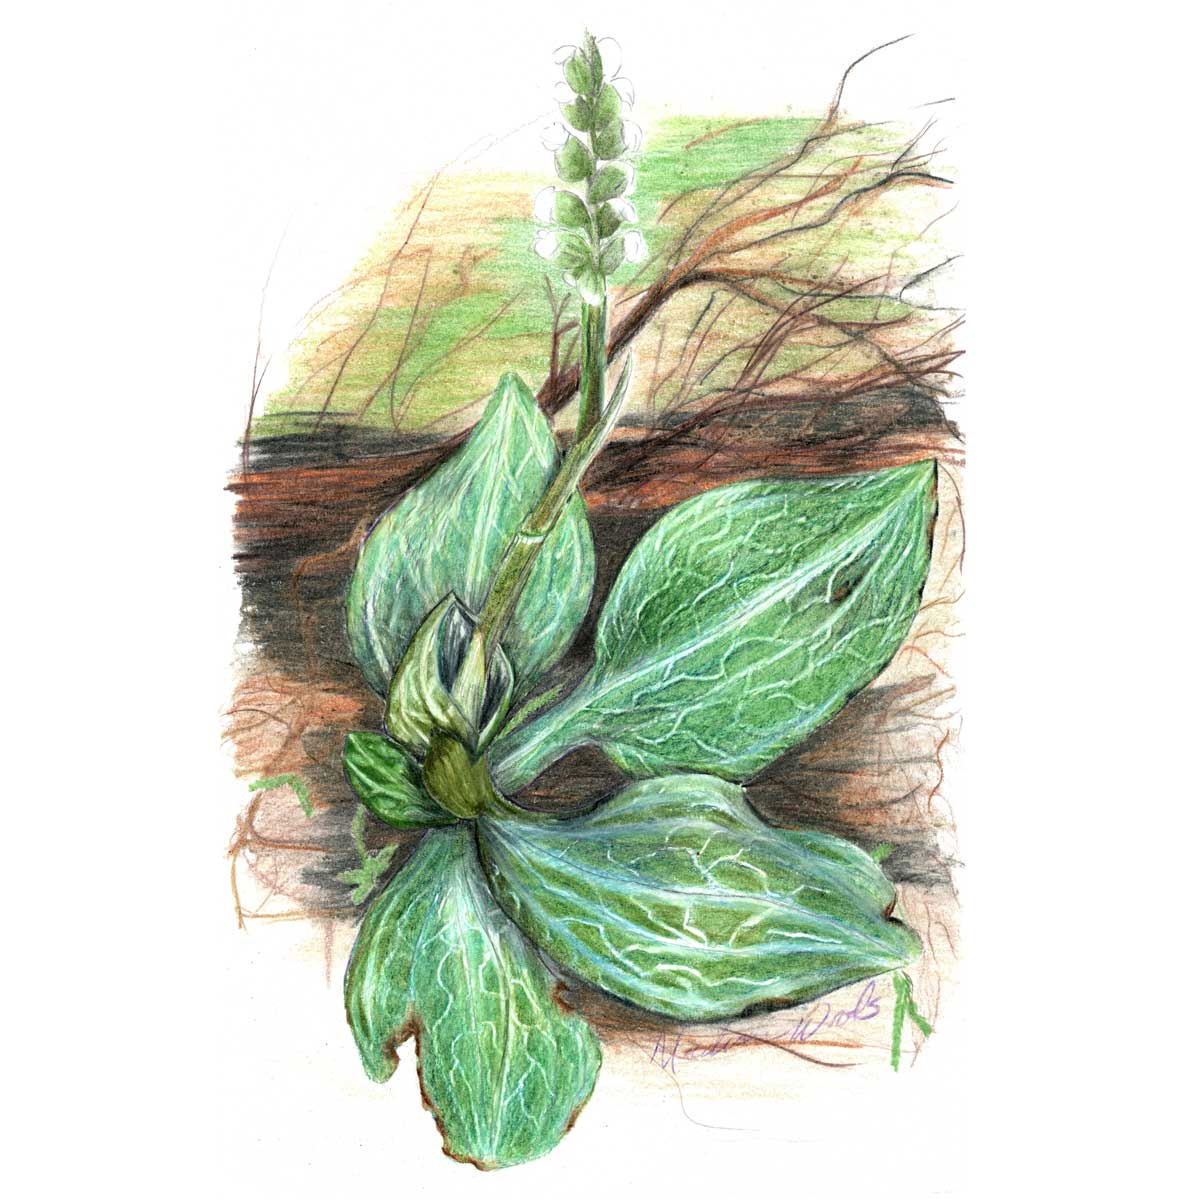 My drawing of this Rattlesnake plantain is available in my NFT Orchid Collection at Openseas.io. Real prints and the original are also available.